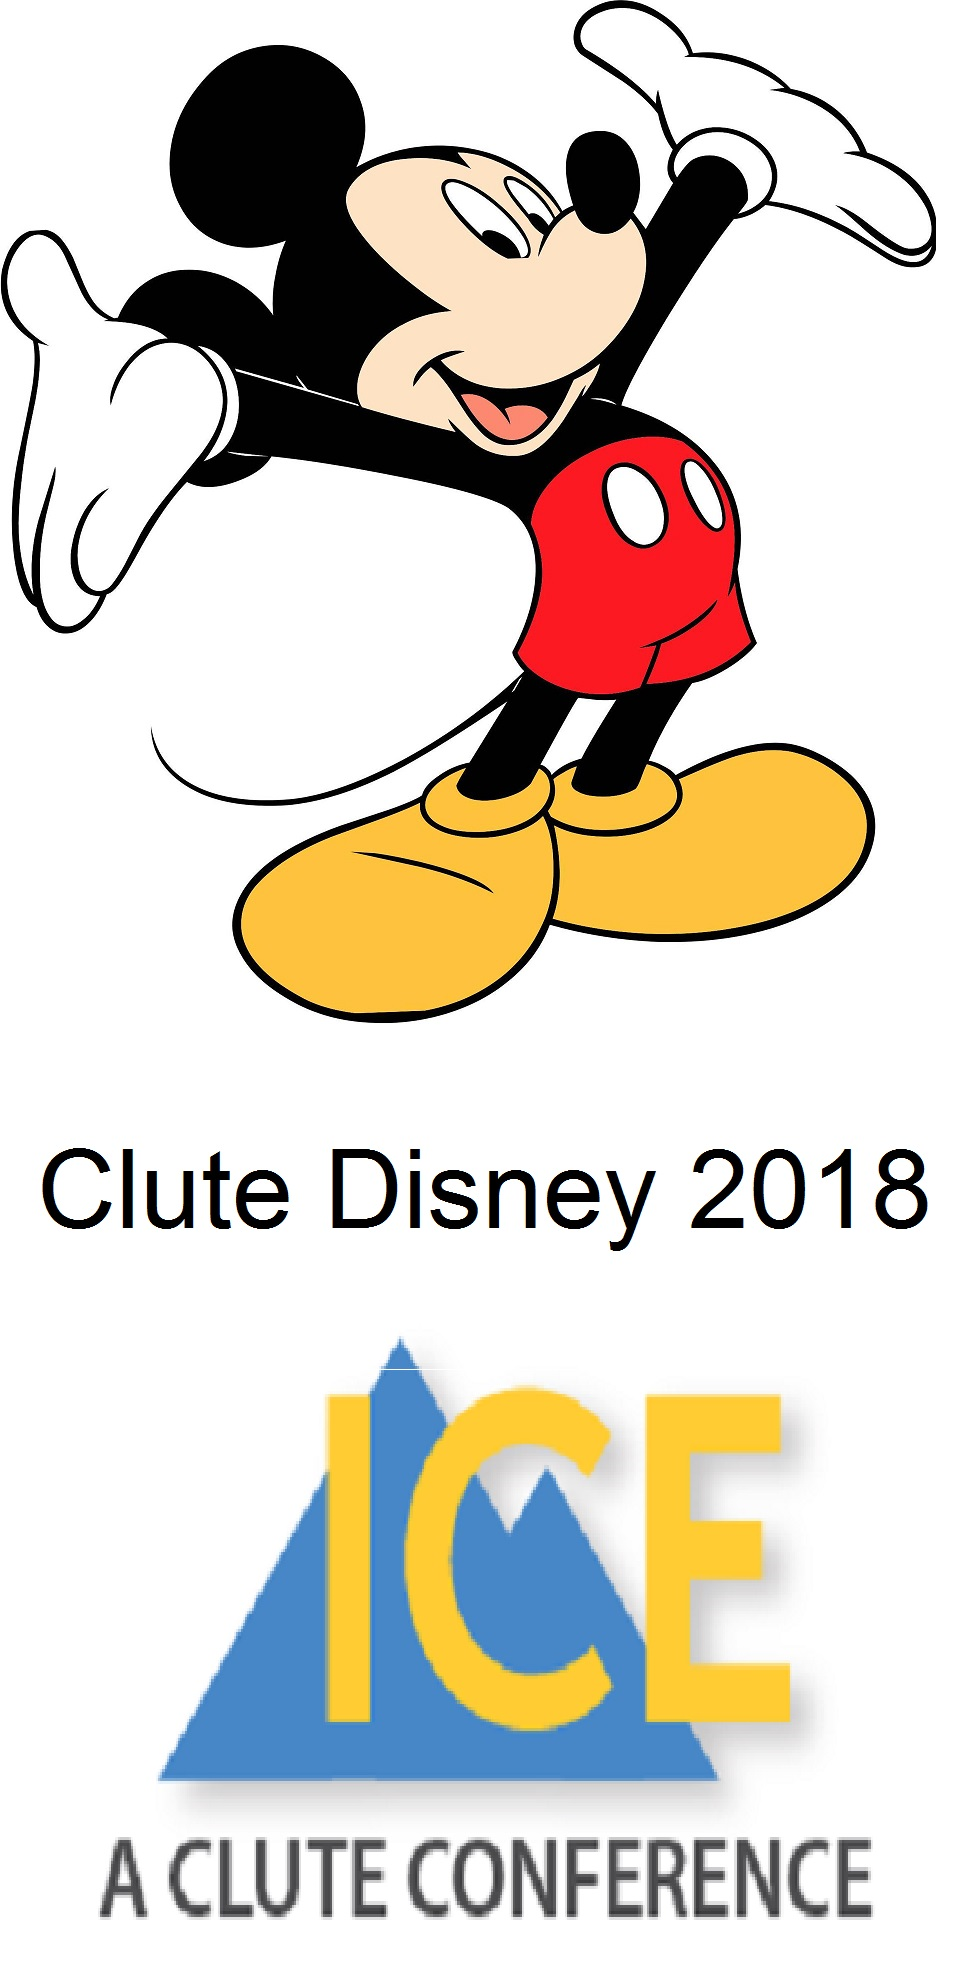 Clute Conference Disneyworld